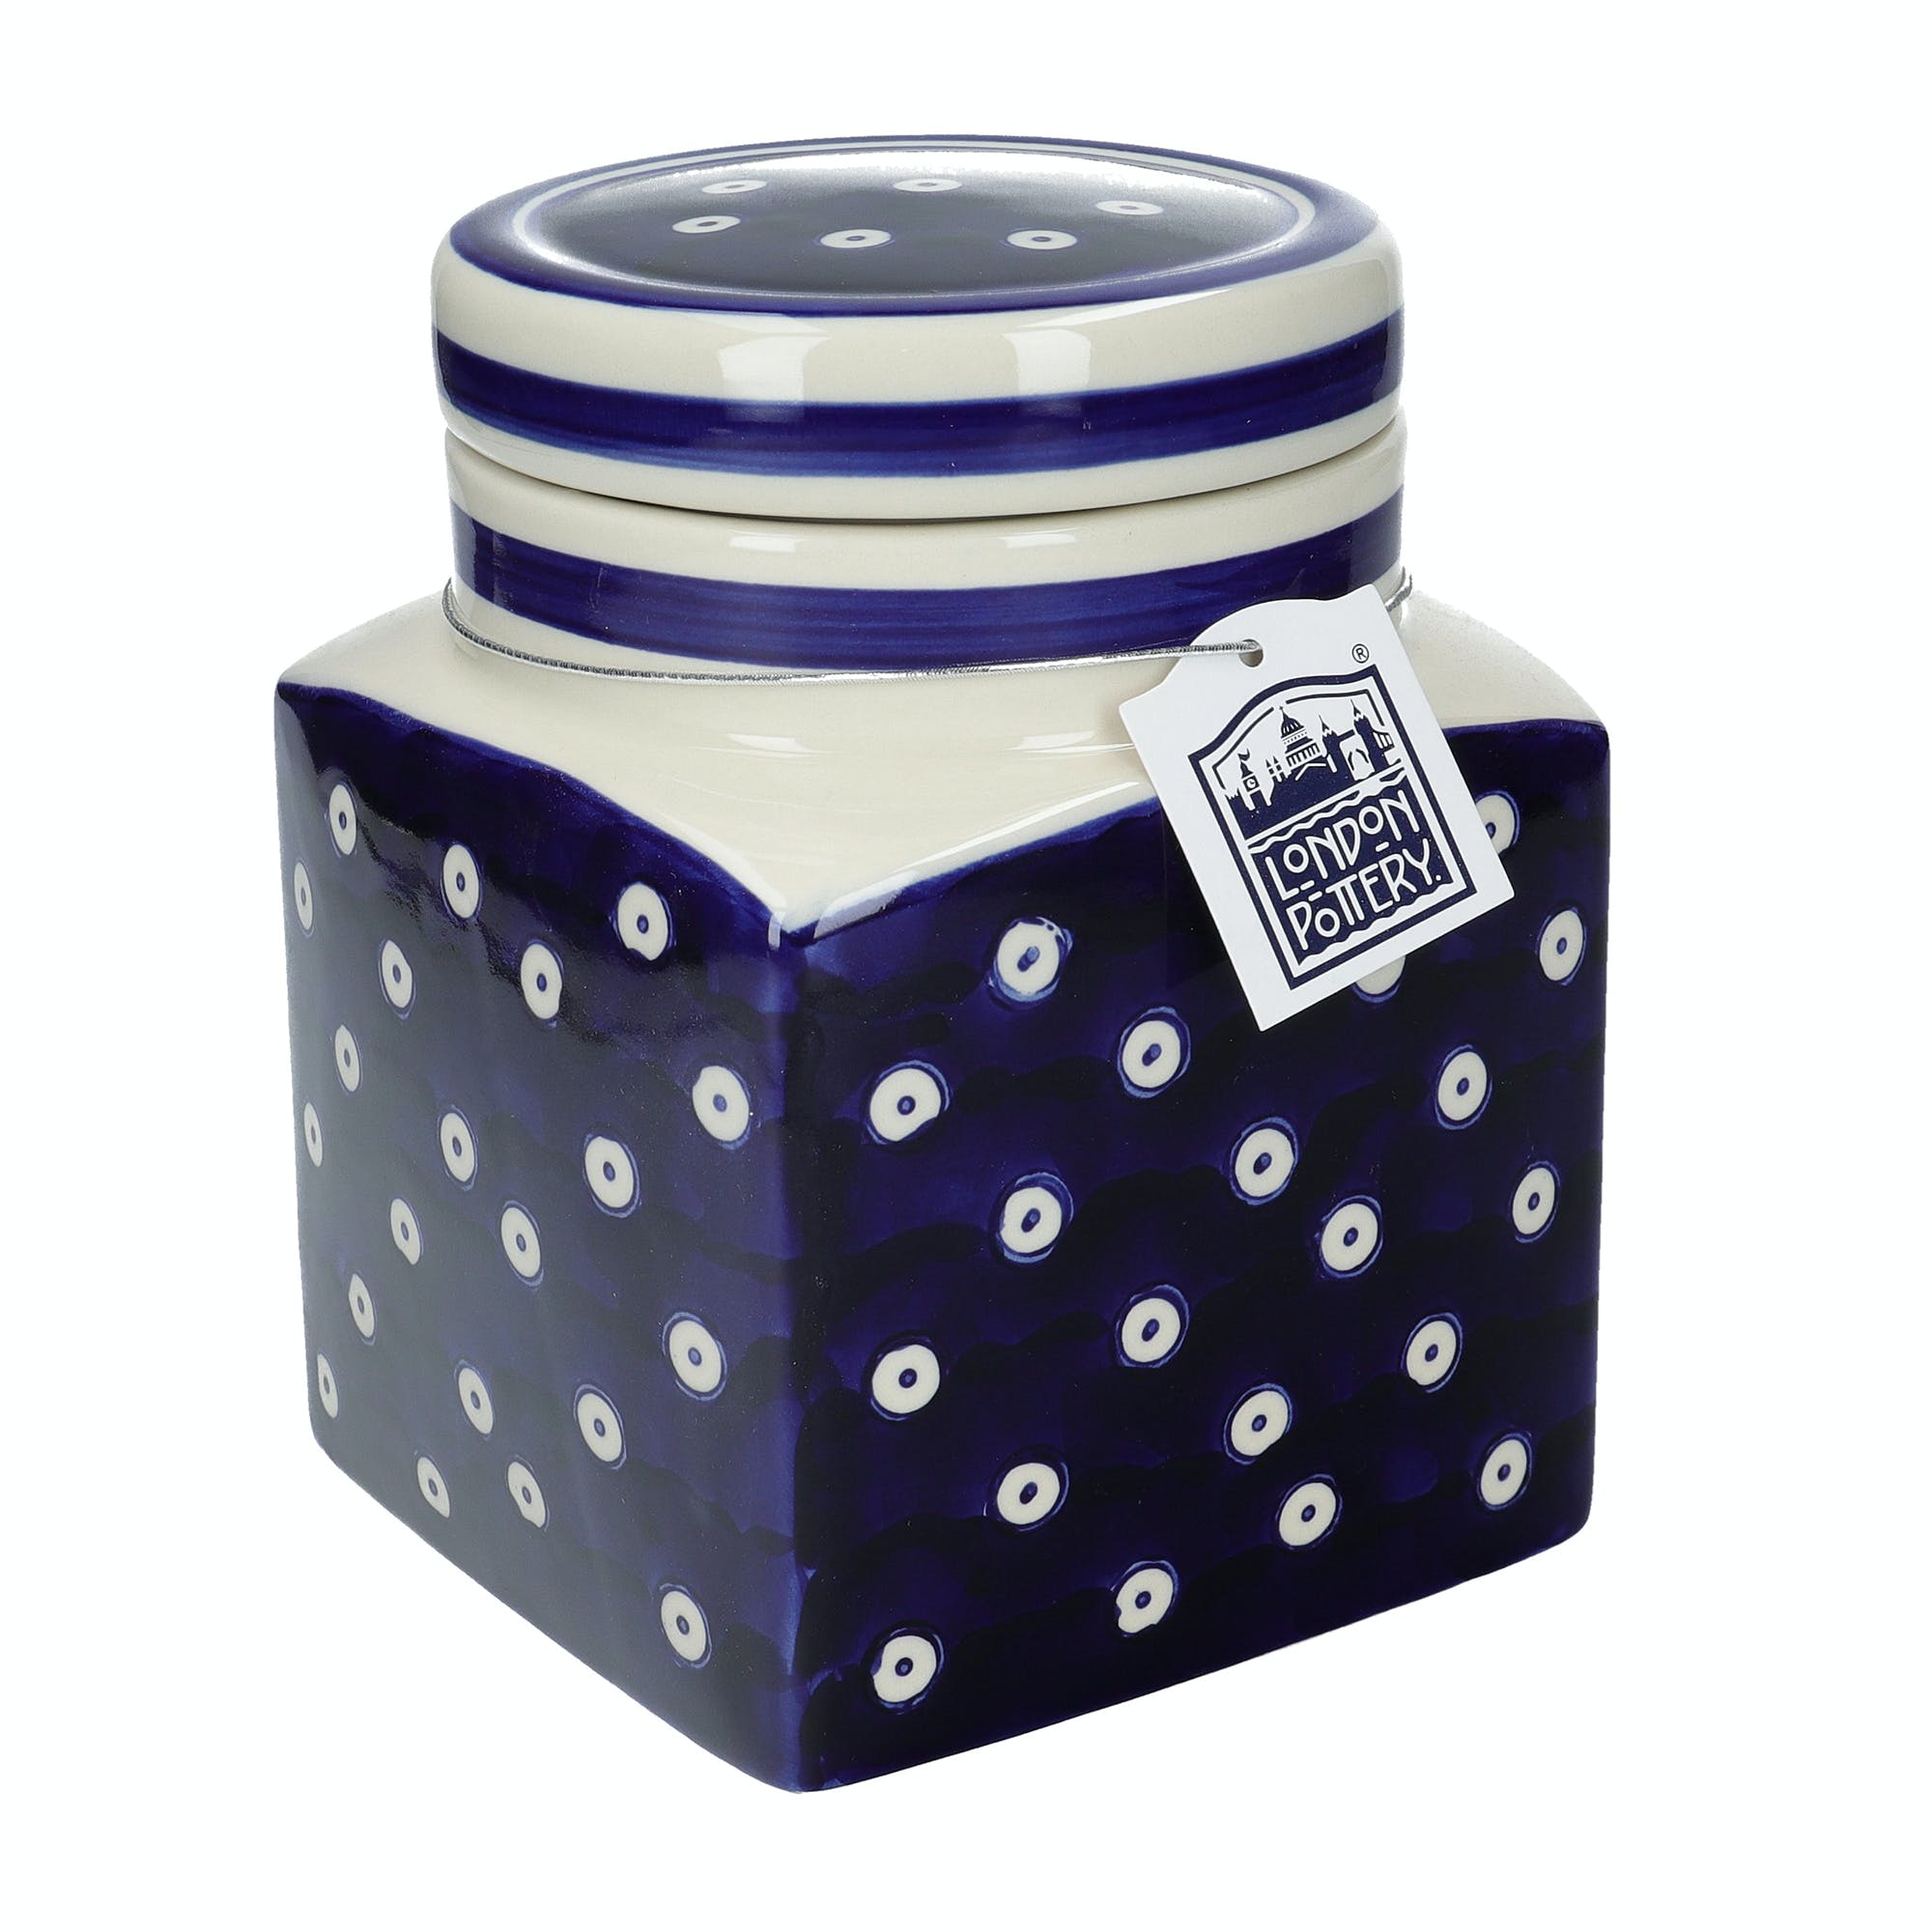 London Pottery Ceramic Storage Canister Blue and White Circle Design - Kate's Cupboard